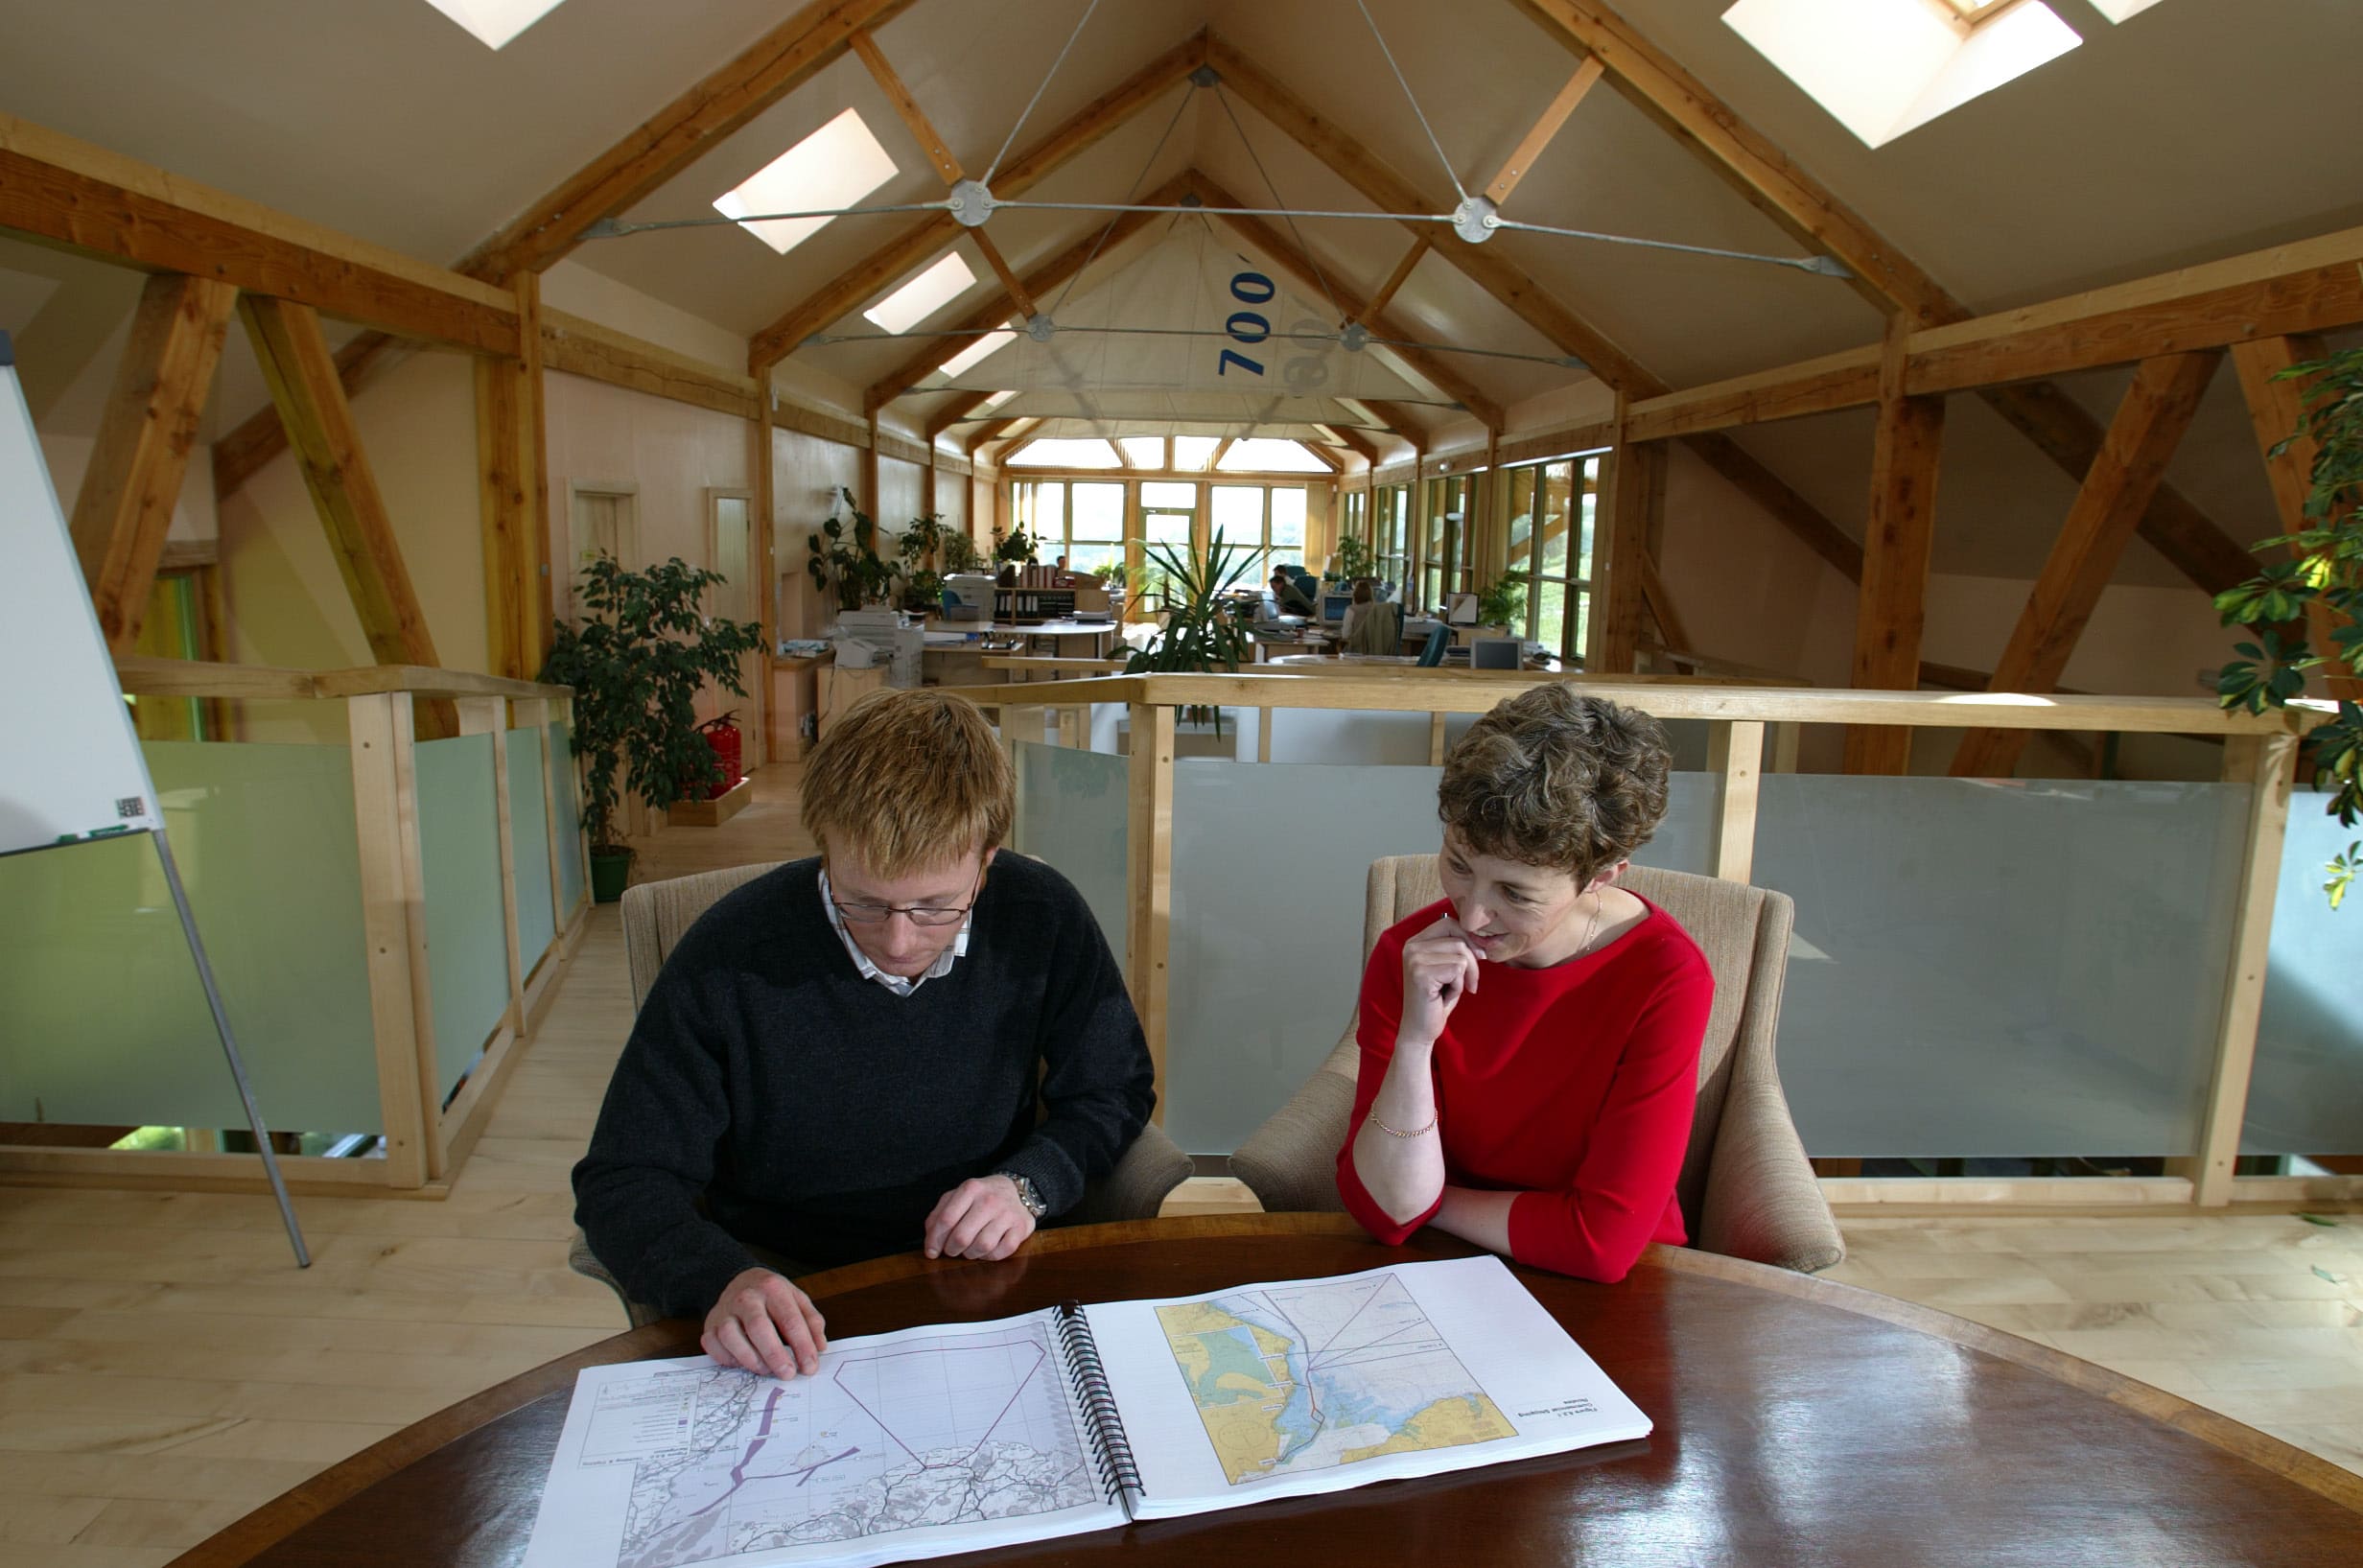 Two people working on architectural drawings on the first floor of an office. The interiors are long and narrow with skylights. The timber frame of the building is visible.